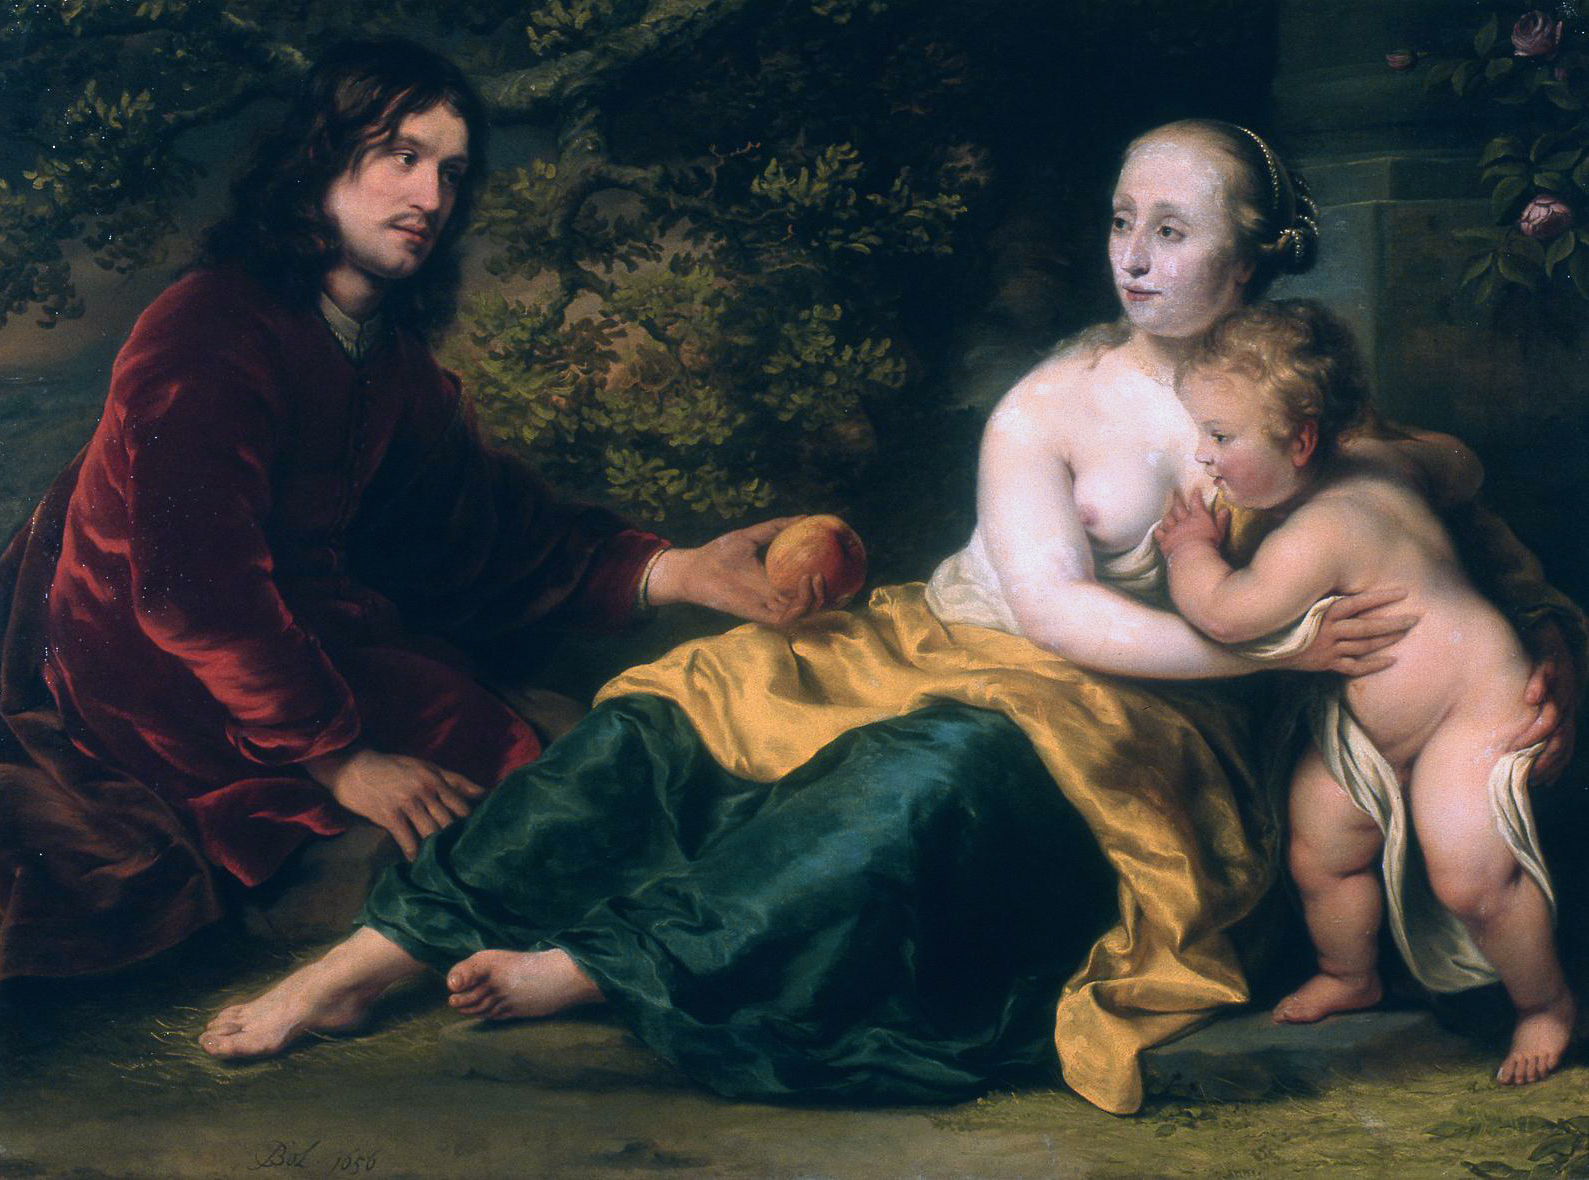 A Rembrandt painting depicting a man, woman, and baby.